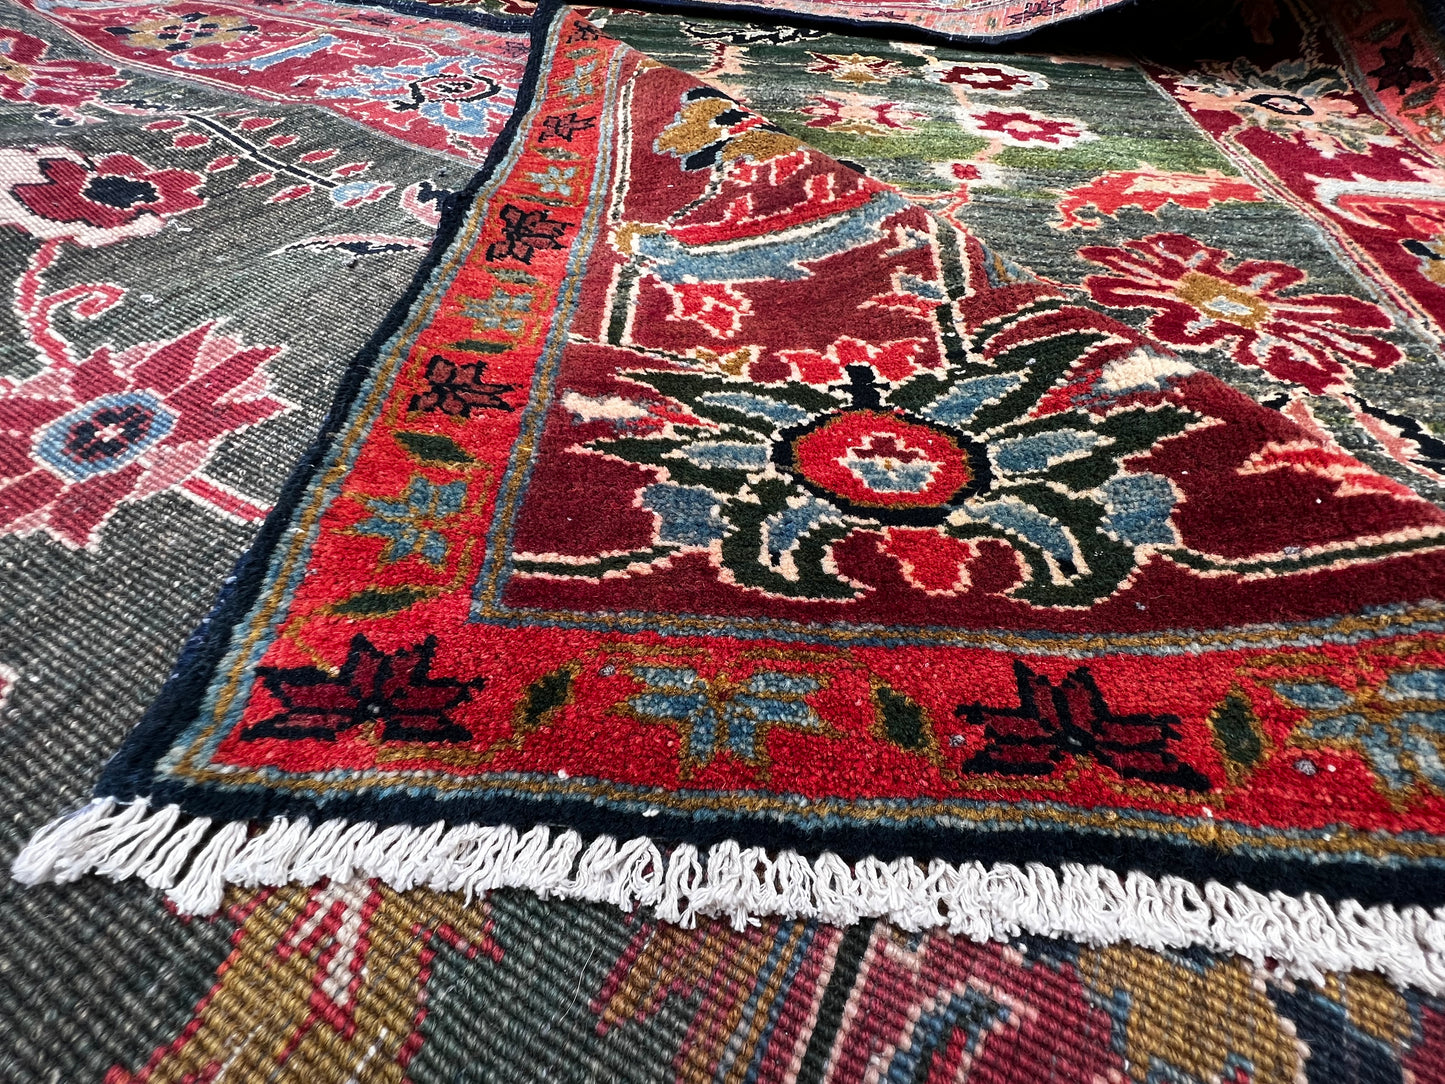 Afghan Hand Knotted/ Knitted Living Room/Dining Room Modern ChobRang Area Rug 8.6ftx5.4ft (CH-M-8.6X5.4-G/O/-N) (Mazar-e-Sharif) - Kabul Rugs